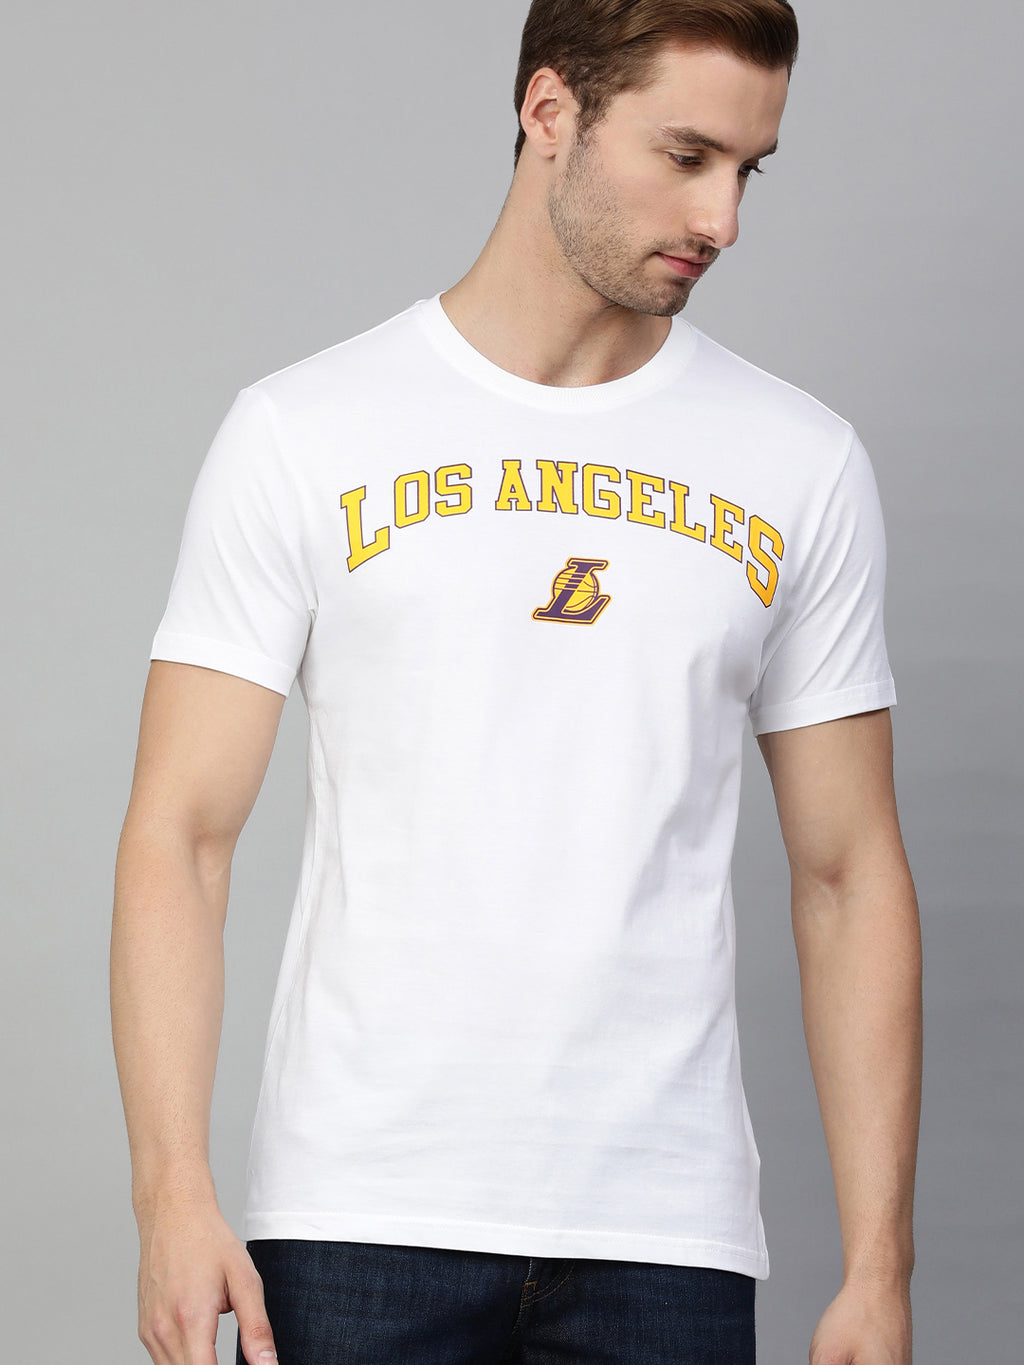 Los Angeles Lakers in the lab The Legends Showtime Lakers shirt - Dalatshirt